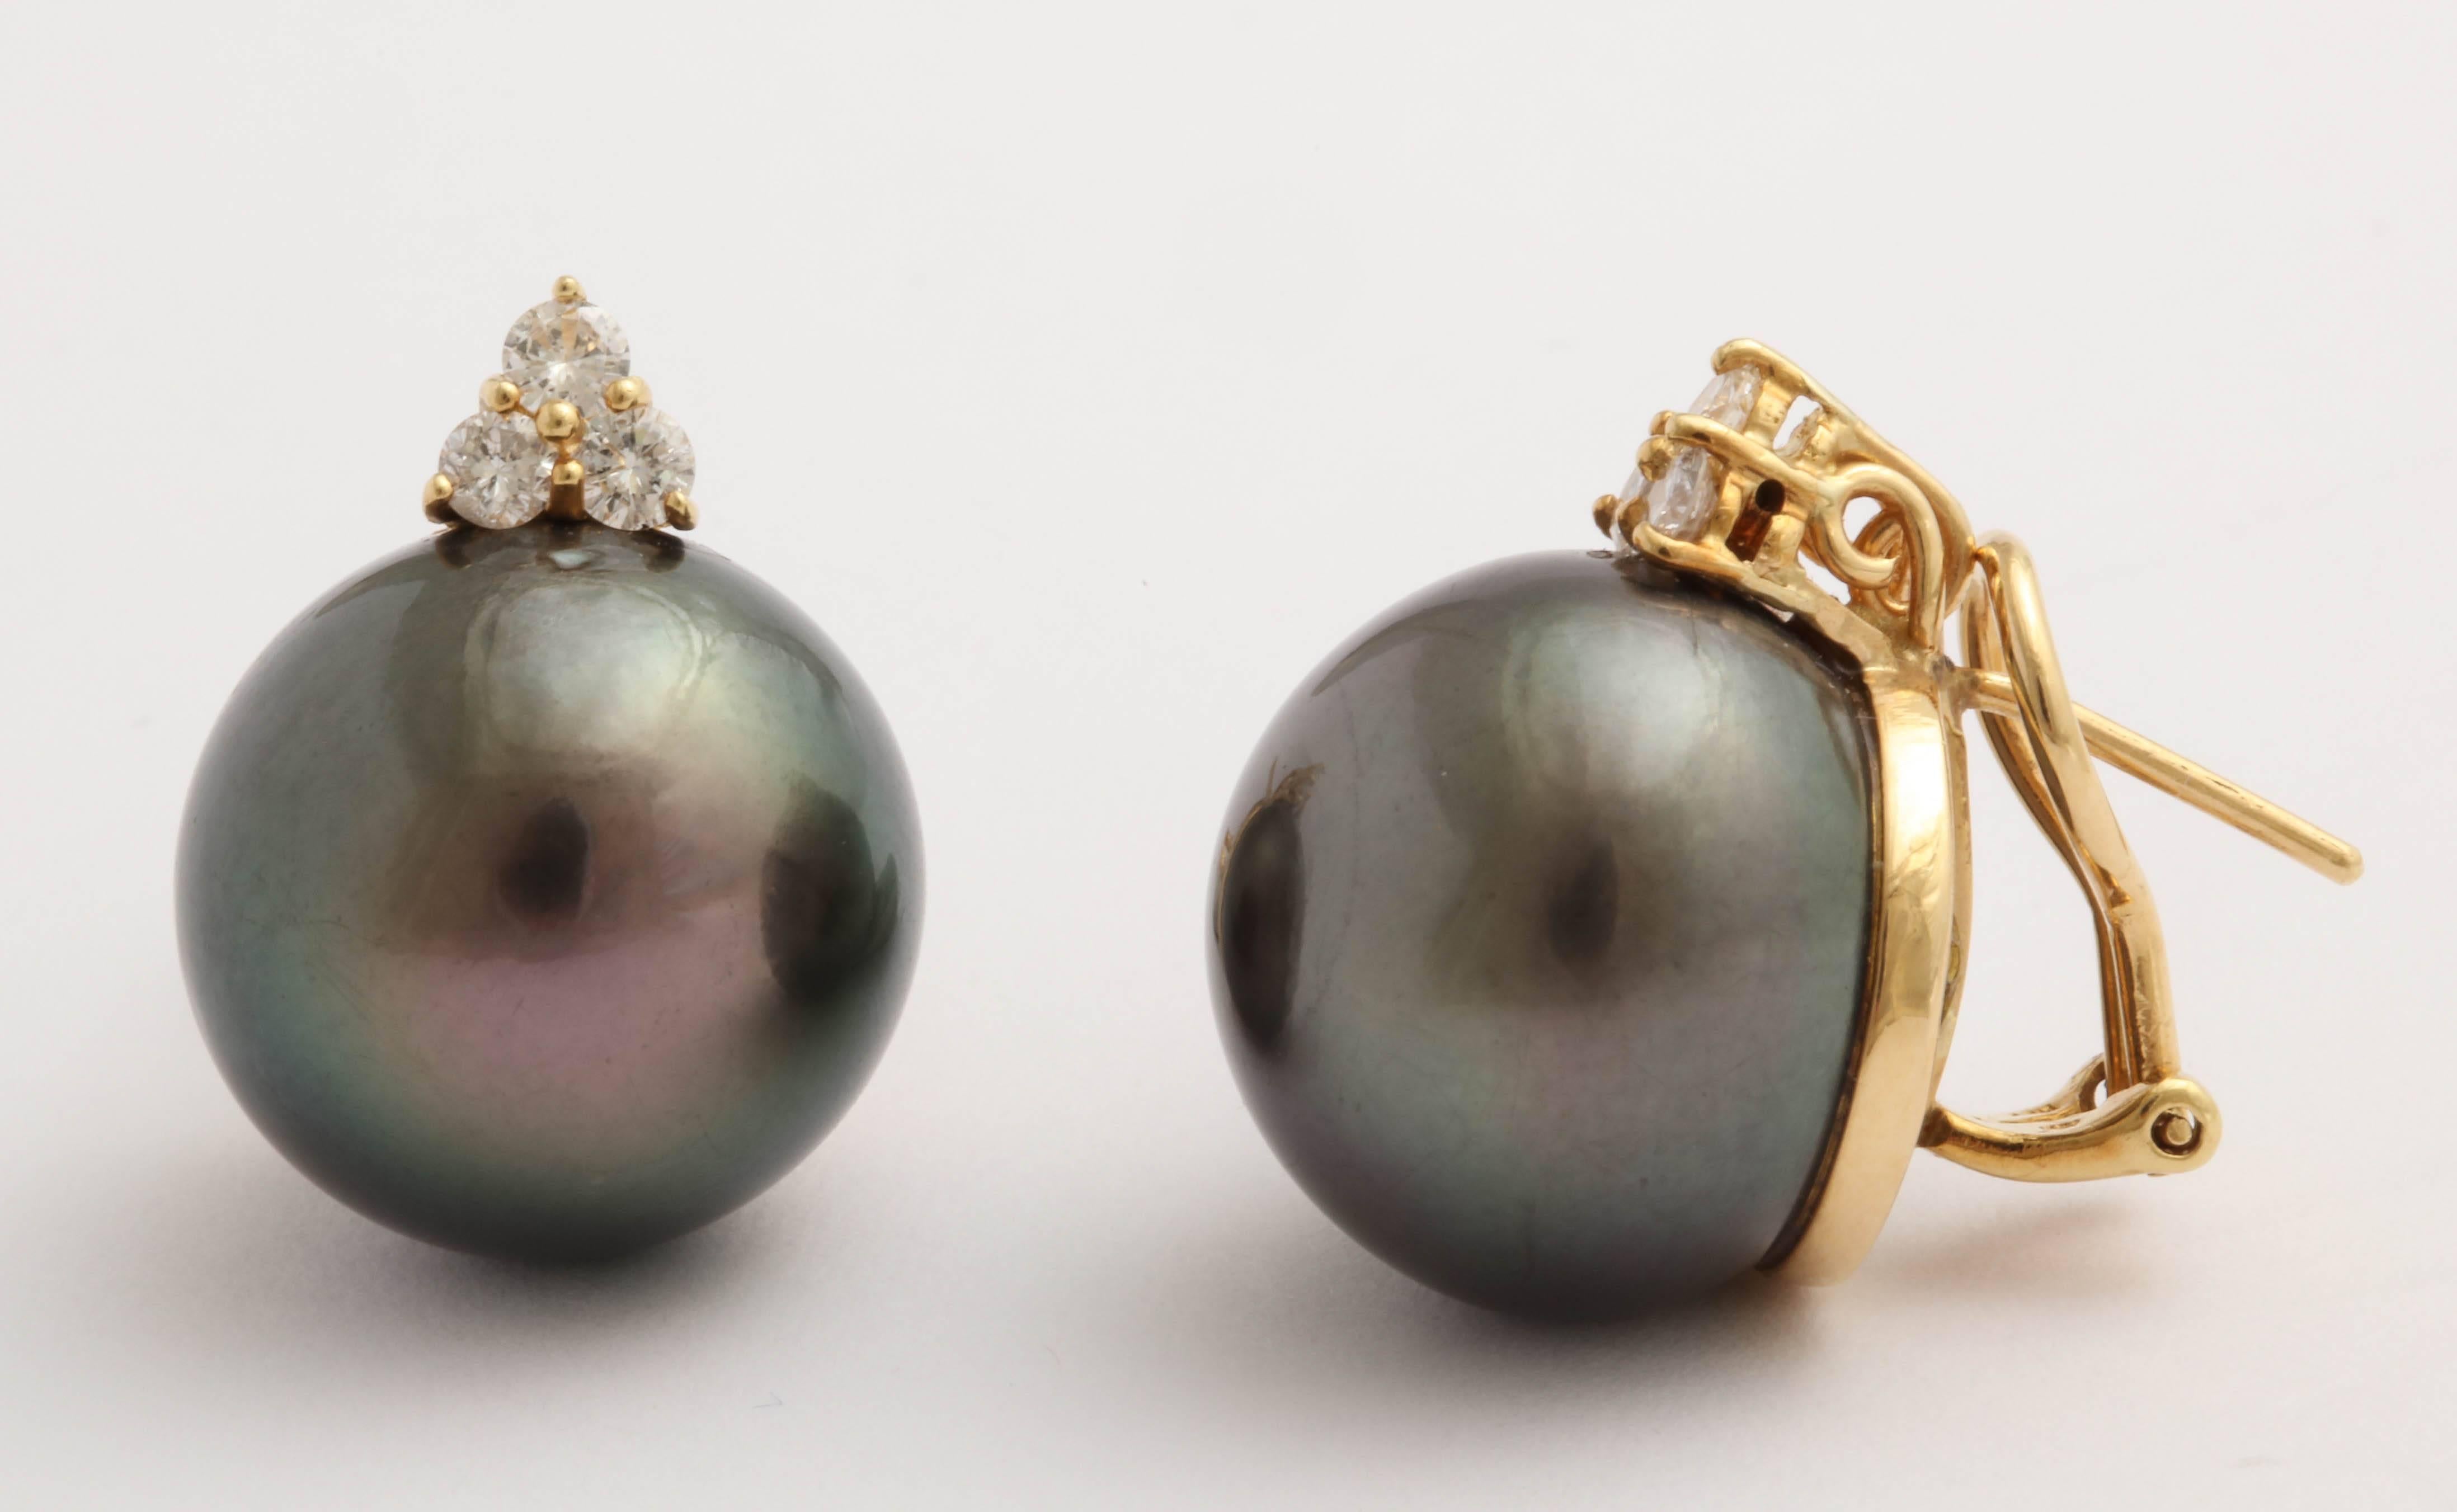 Pair of 18mm South Sea  Gray Pearls set in 18kt Yellow Gold and capped by 3 full cut Diamond in a foliate Setting sitting atop each Pearl.  Earring is set with an Omega Back and a post which can be removed.  Great look!  Clean and with a lovely